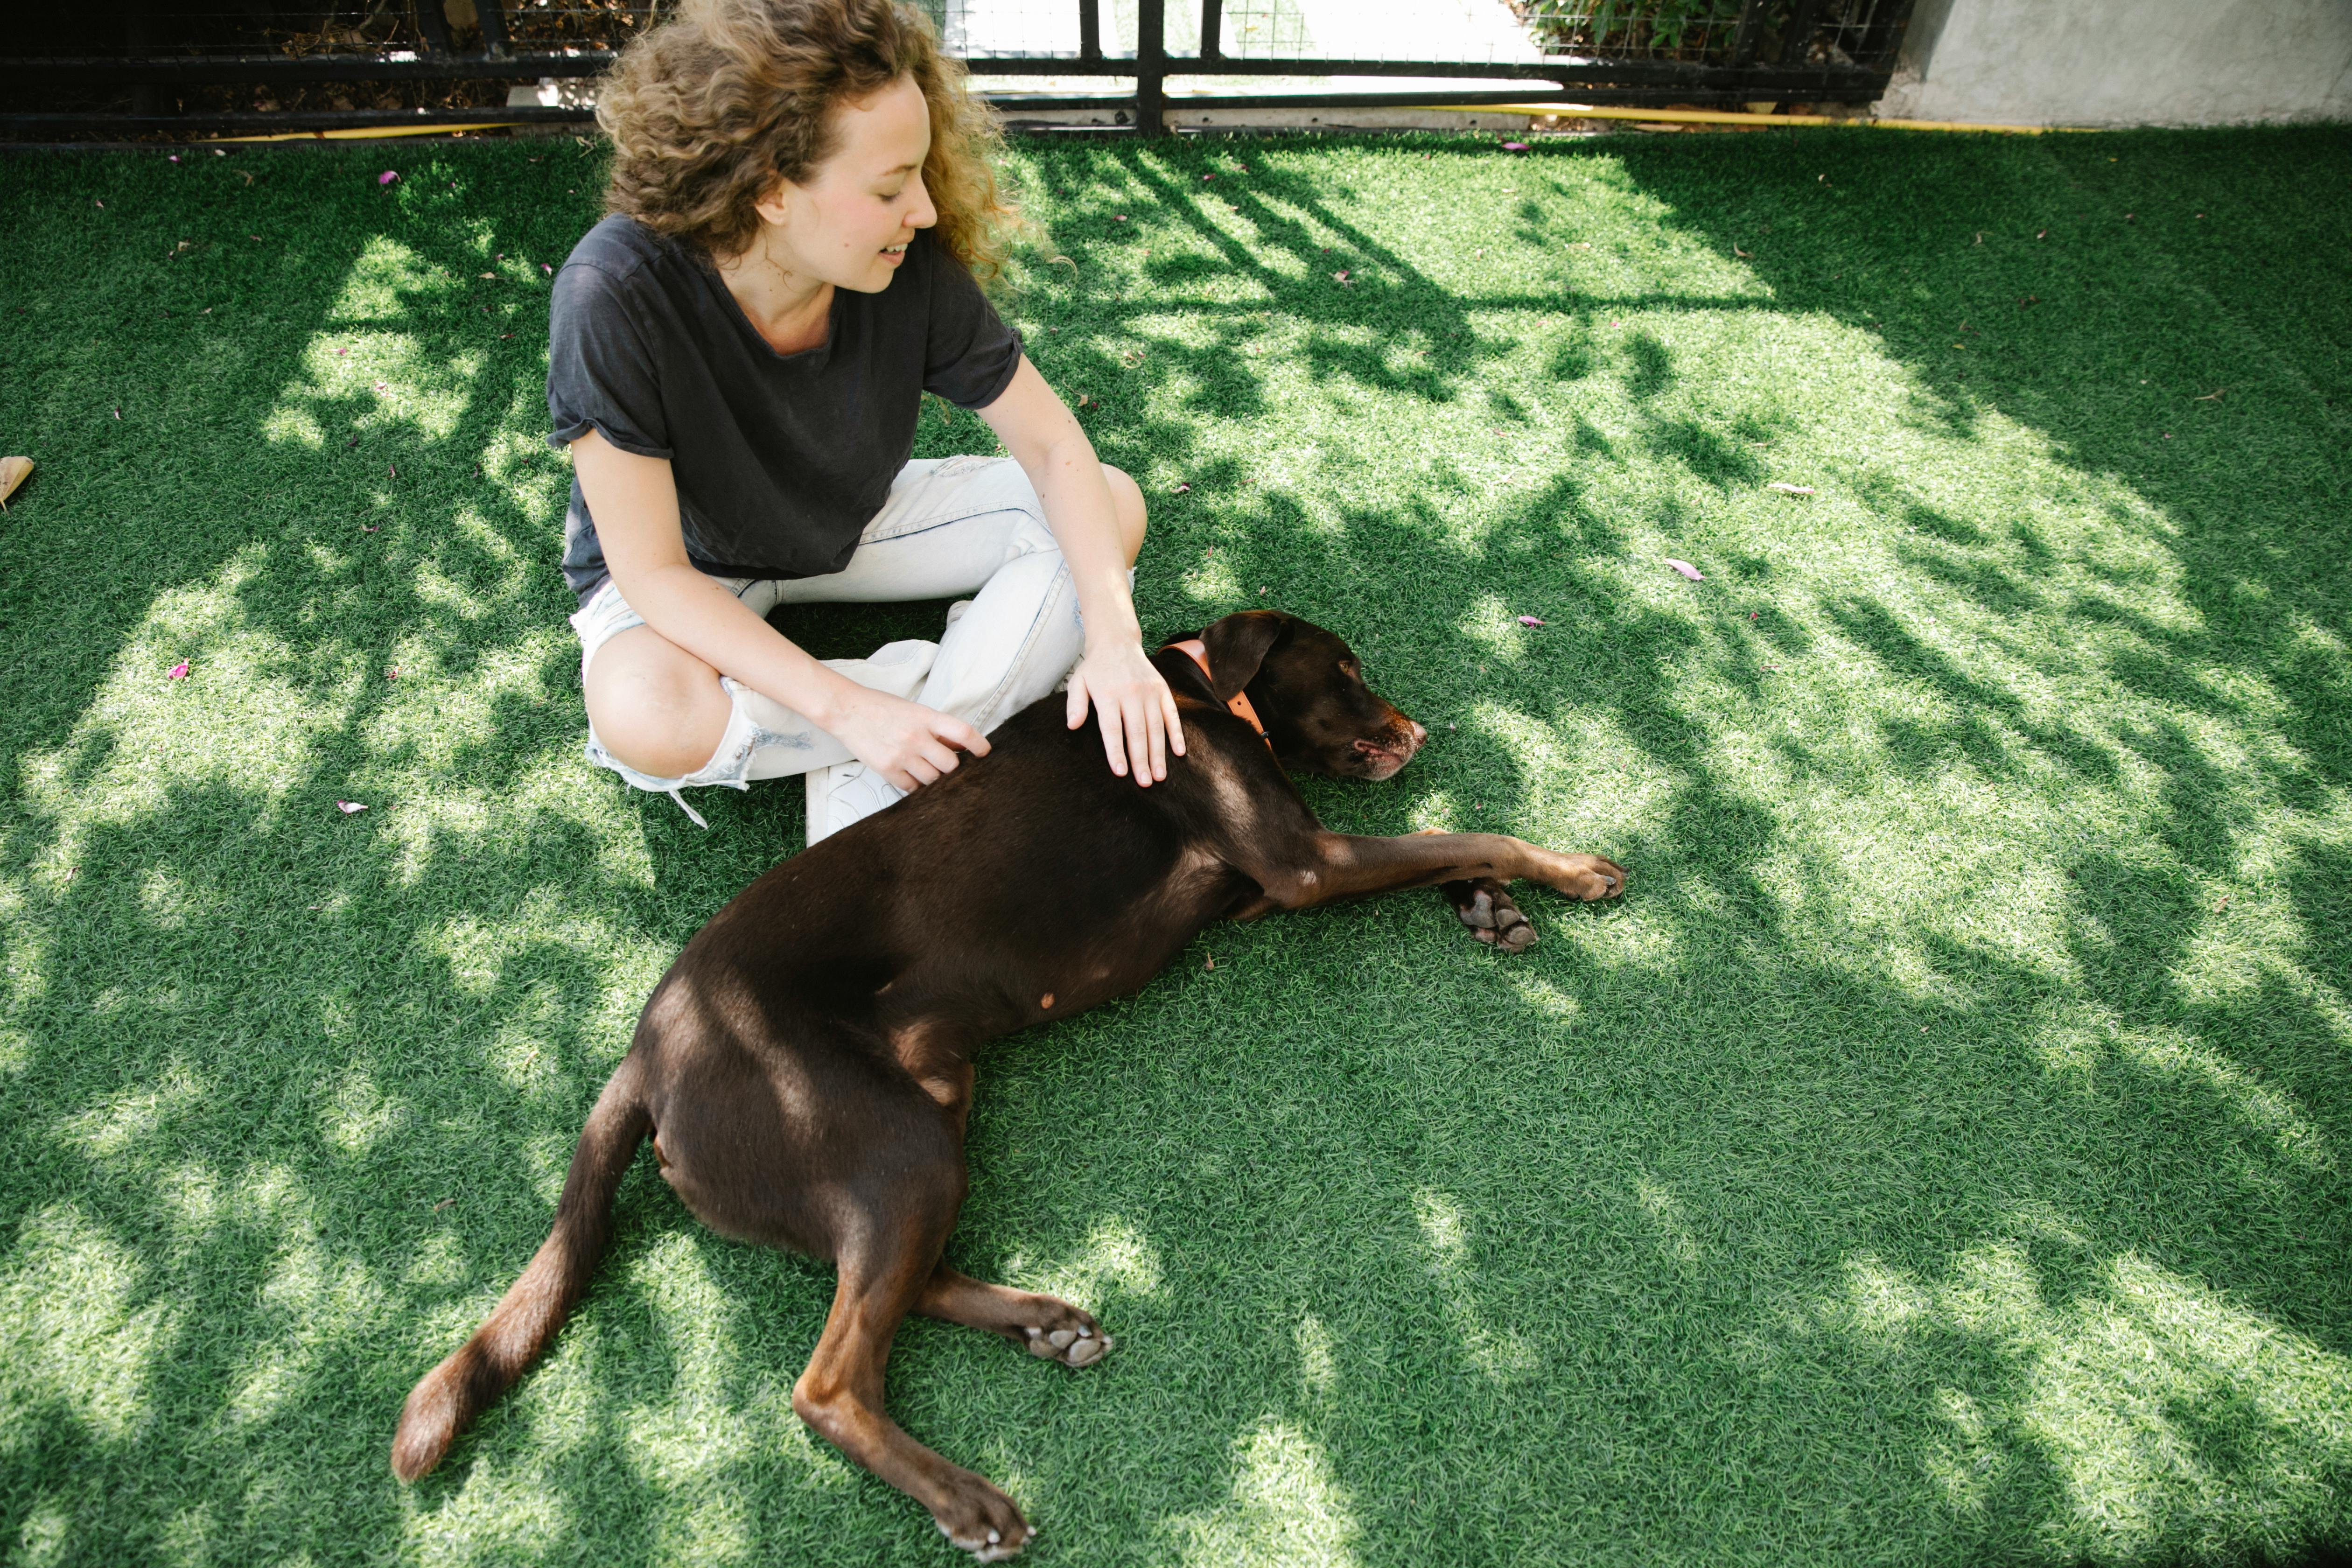 owner caressing pointing dog on lawn with shadows